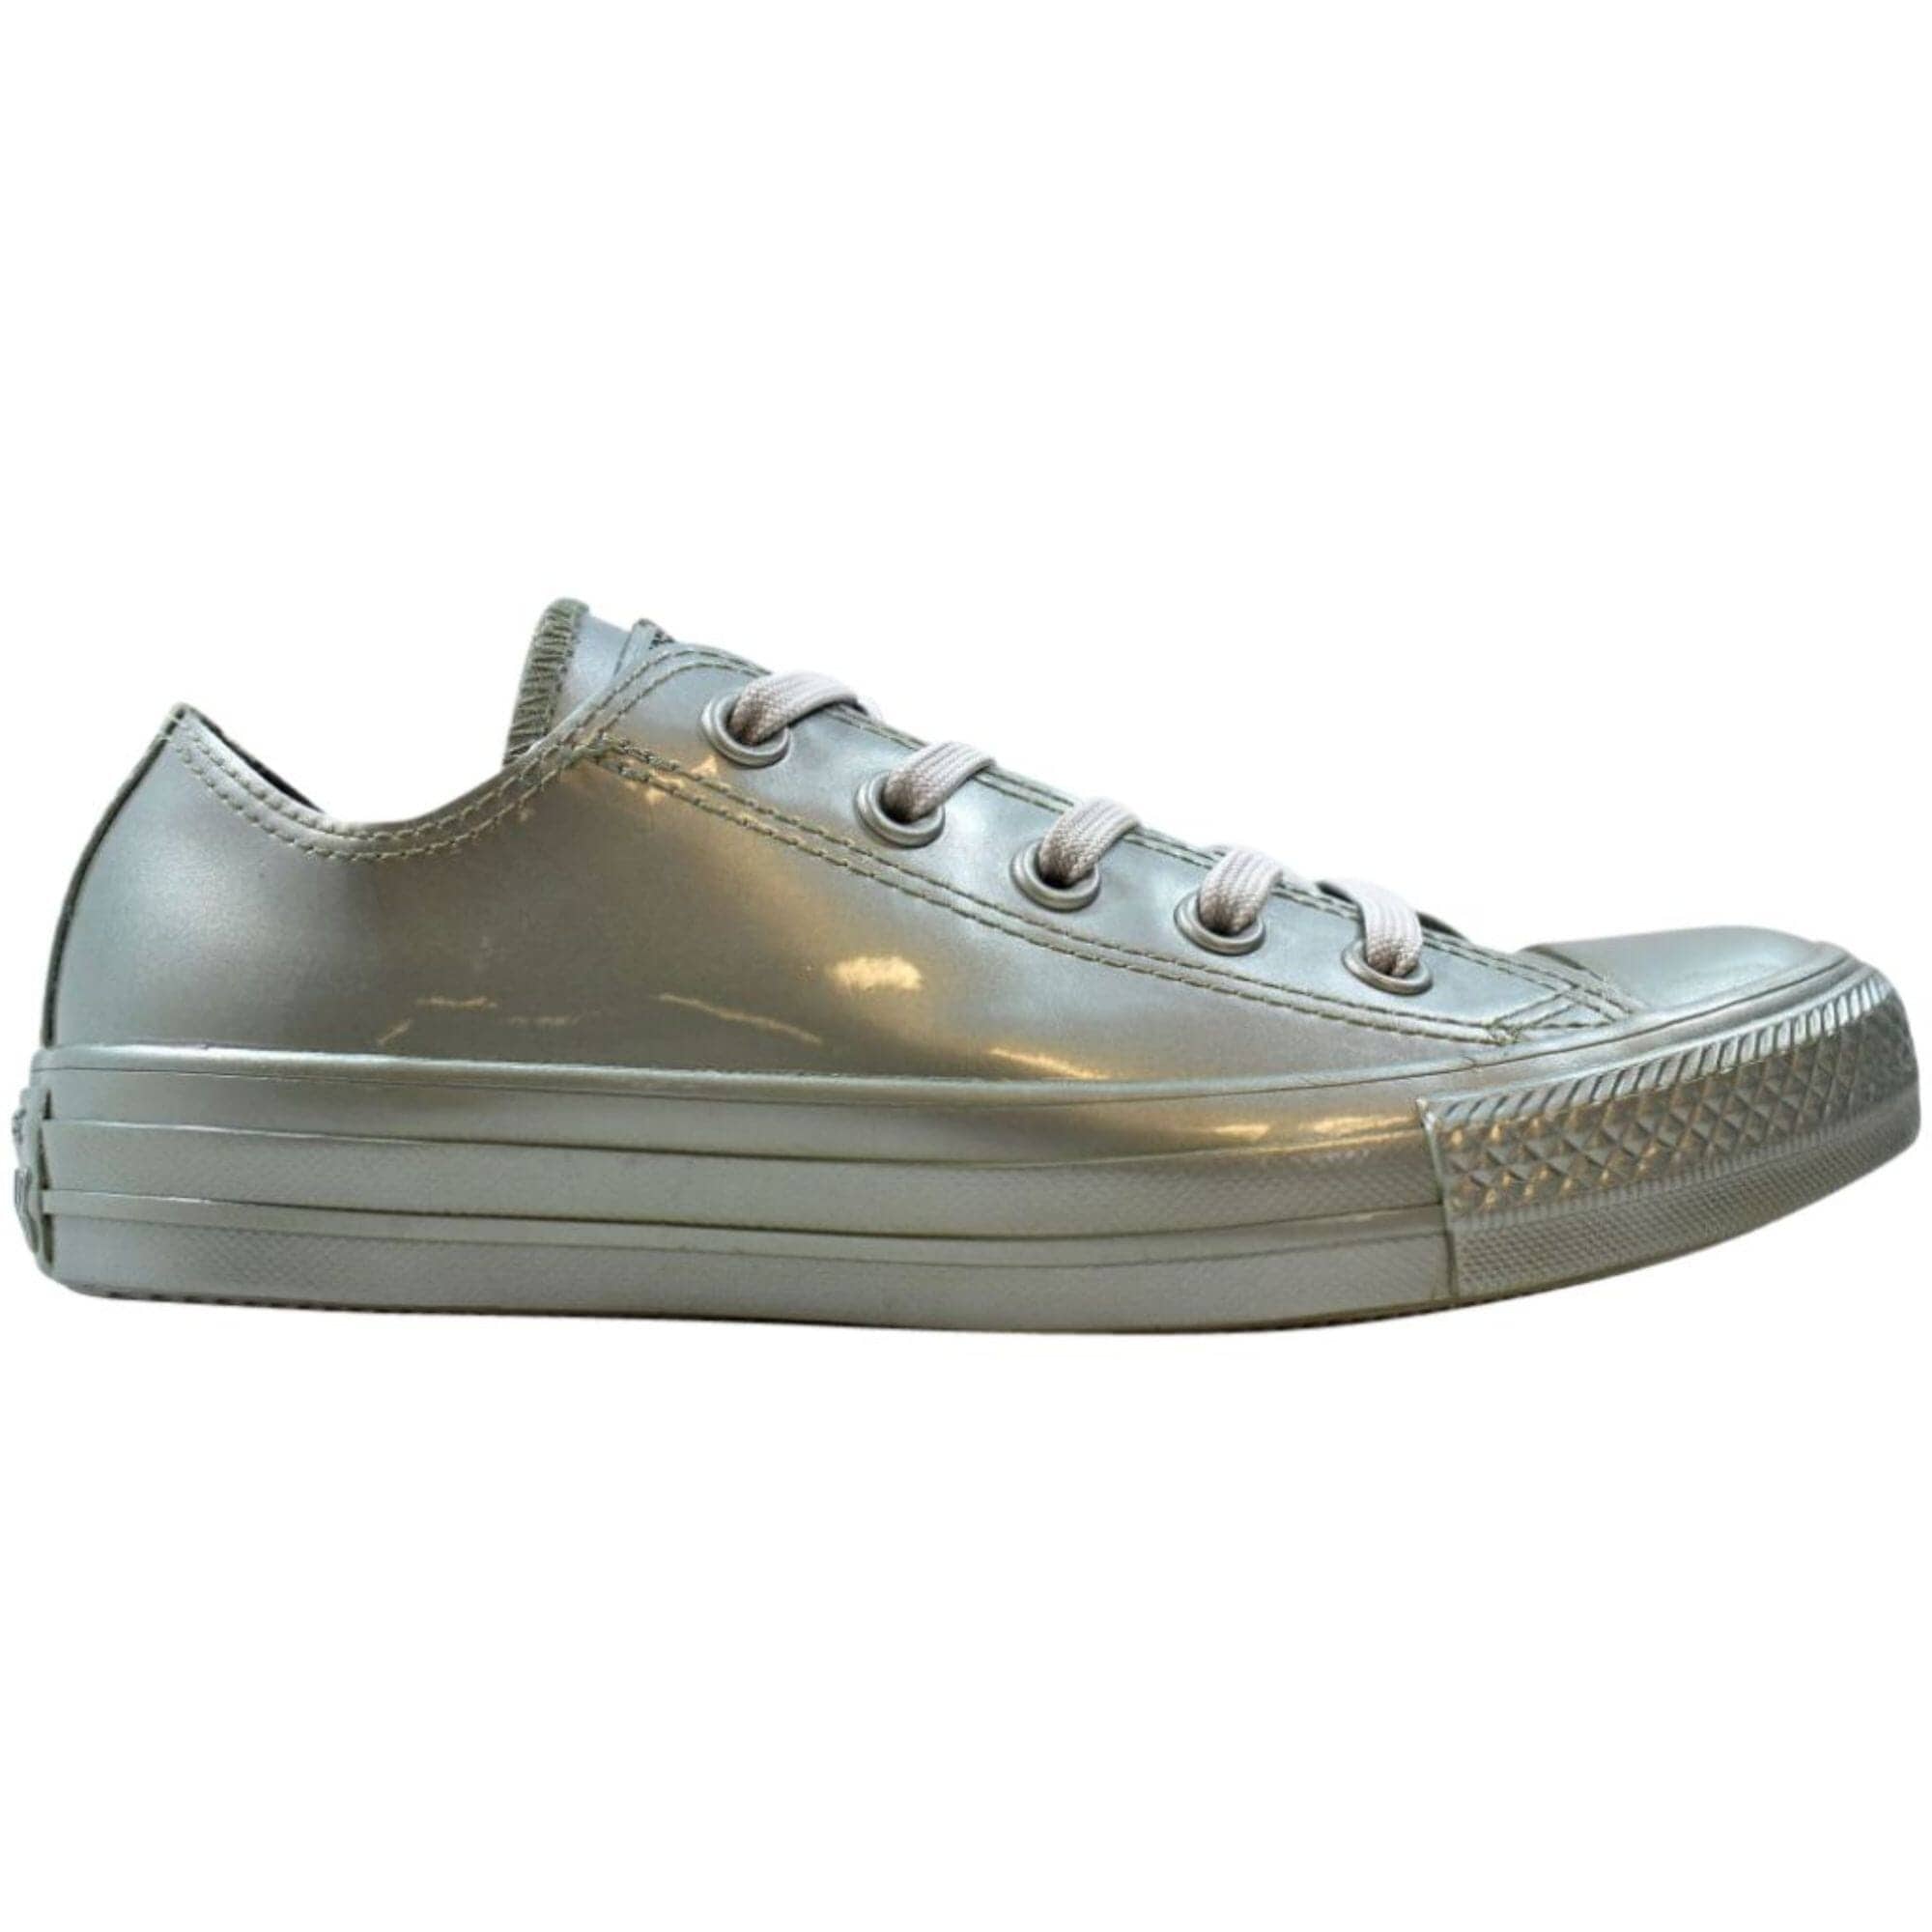 Shop Converse Chuck Taylor All Star Metallic Rubber OX Pure Silver 553272C  Women's Size 6 - Overstock - 30888313